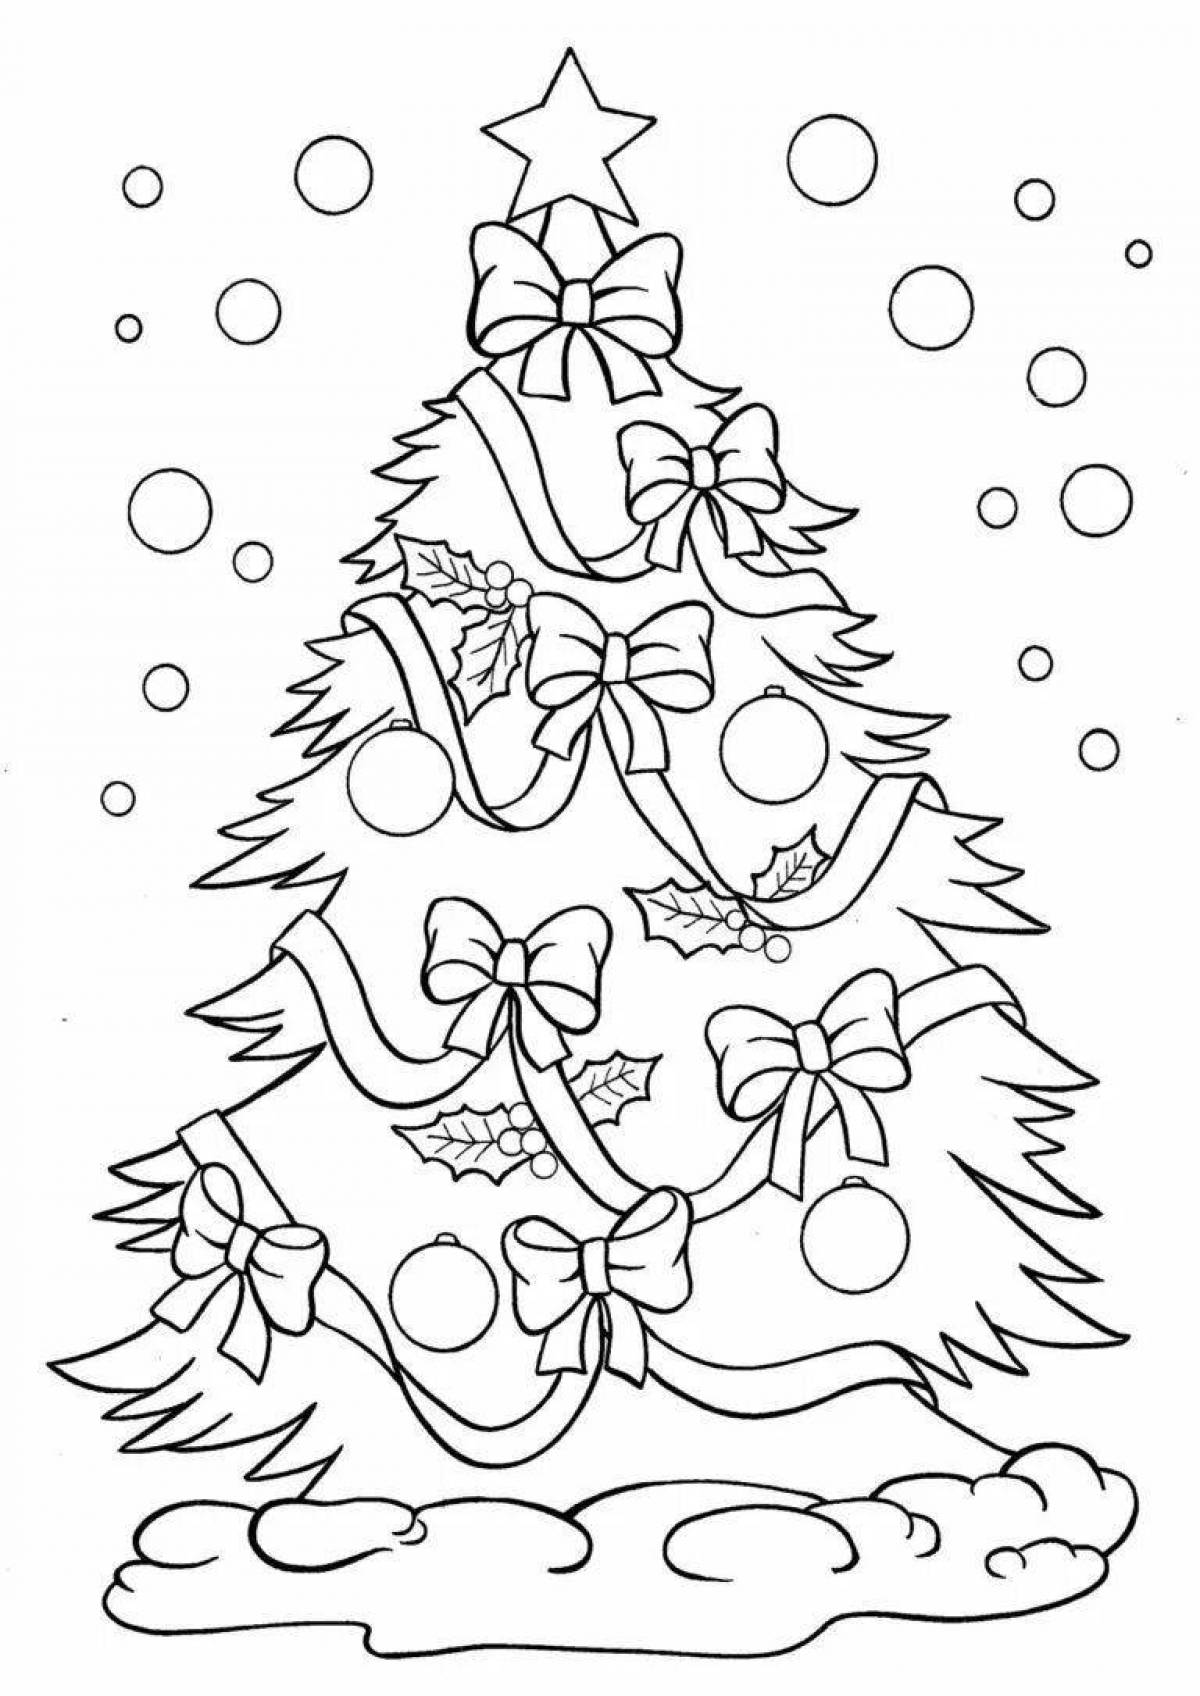 Sublime coloring page beautiful tree